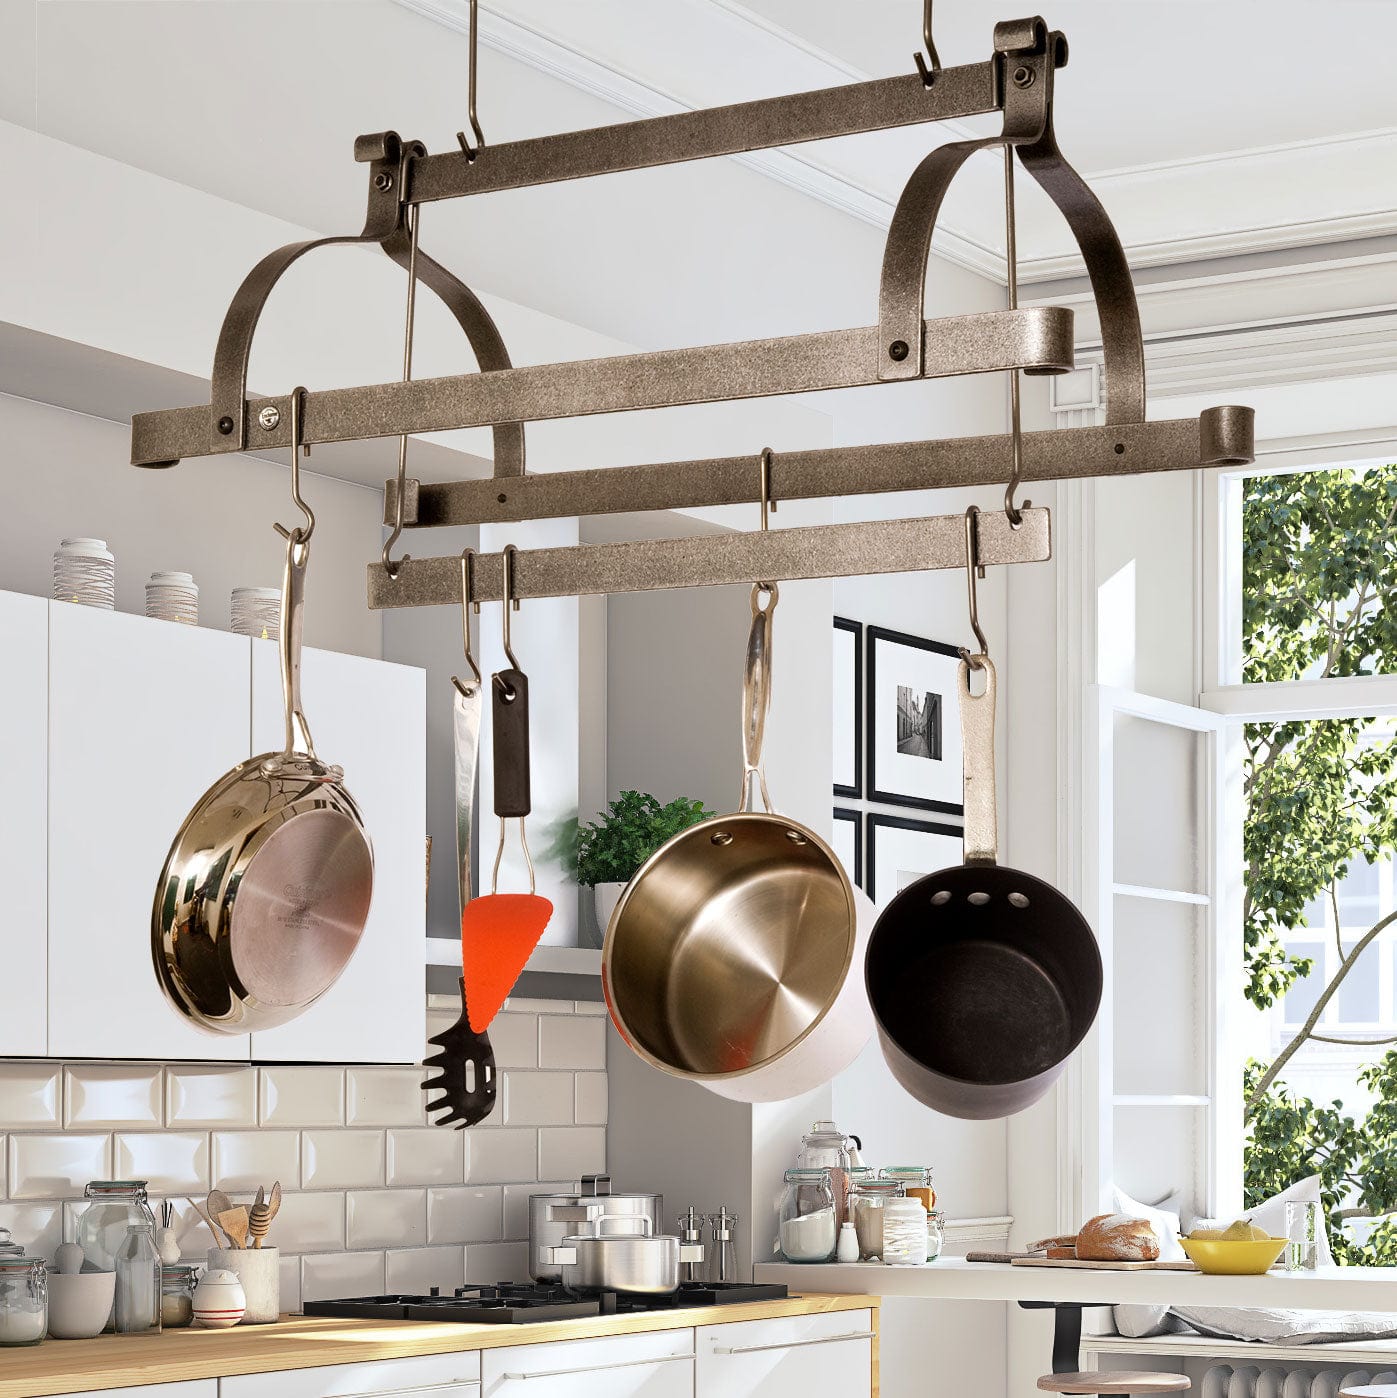 Enclume Three Bar Ceiling Pot Rack In Hammered Steel Design Products